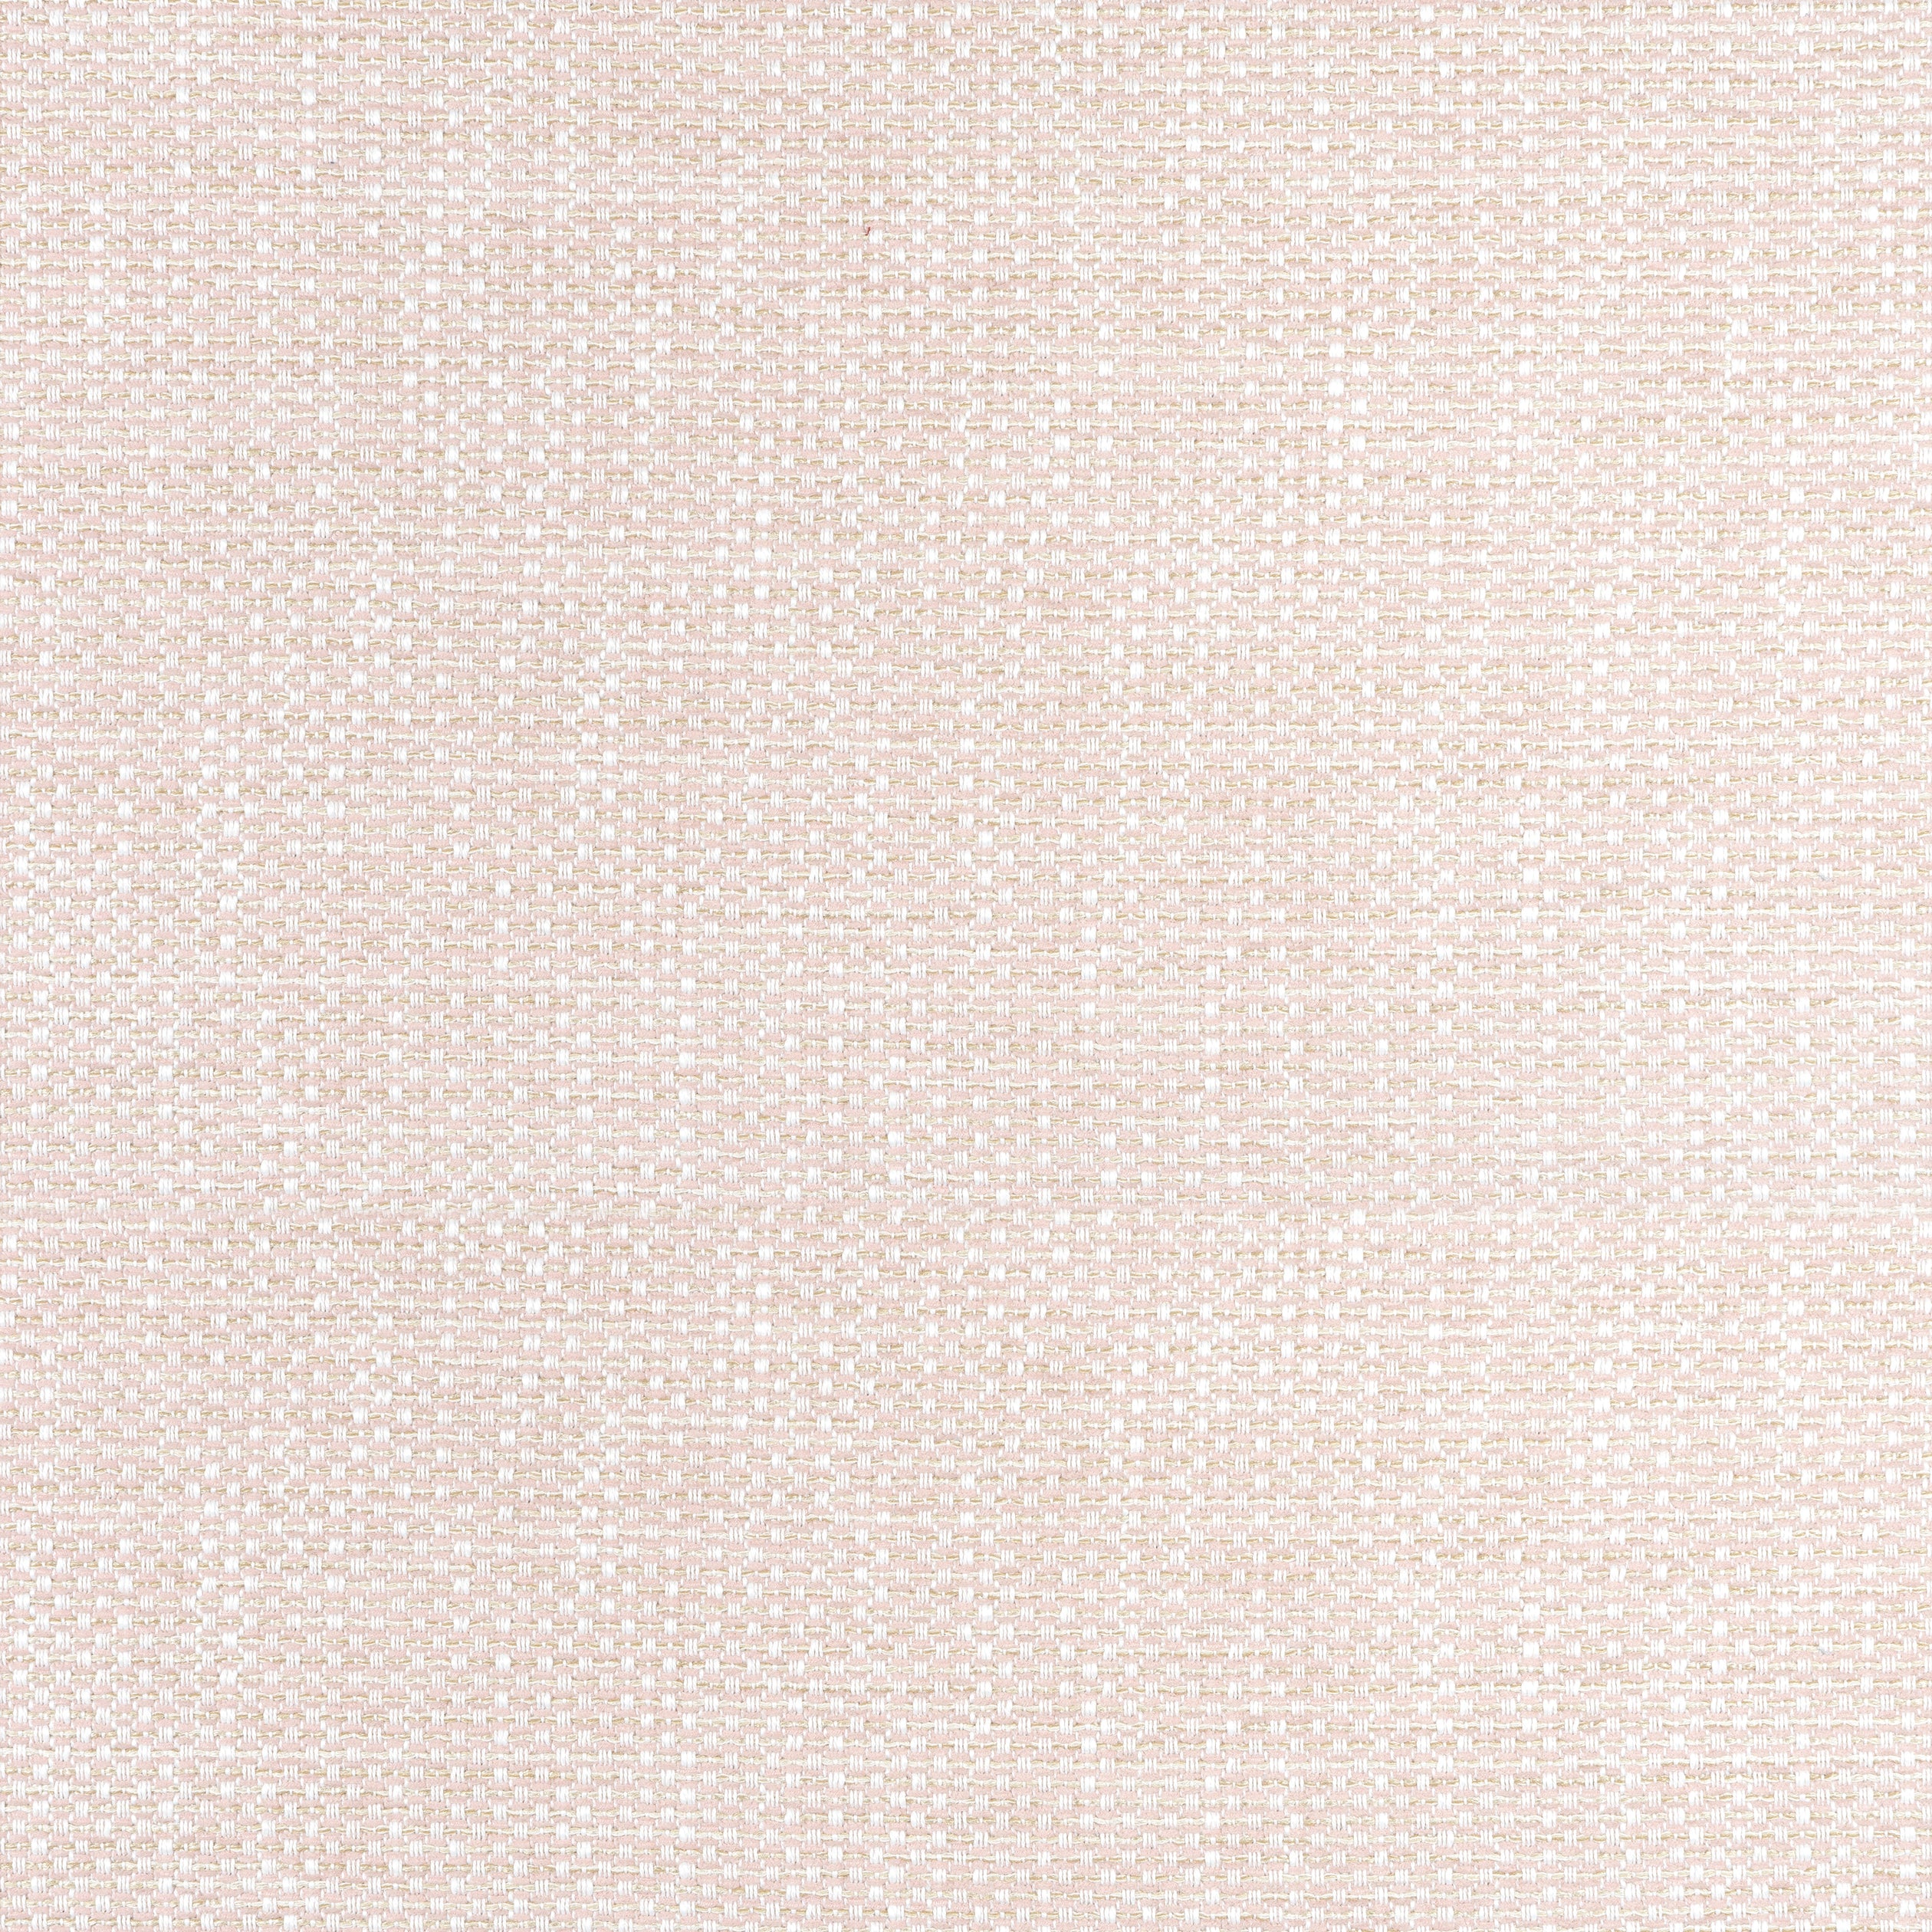 Cascade fabric in blush color - pattern number W75260 - by Thibaut in the Elements collection